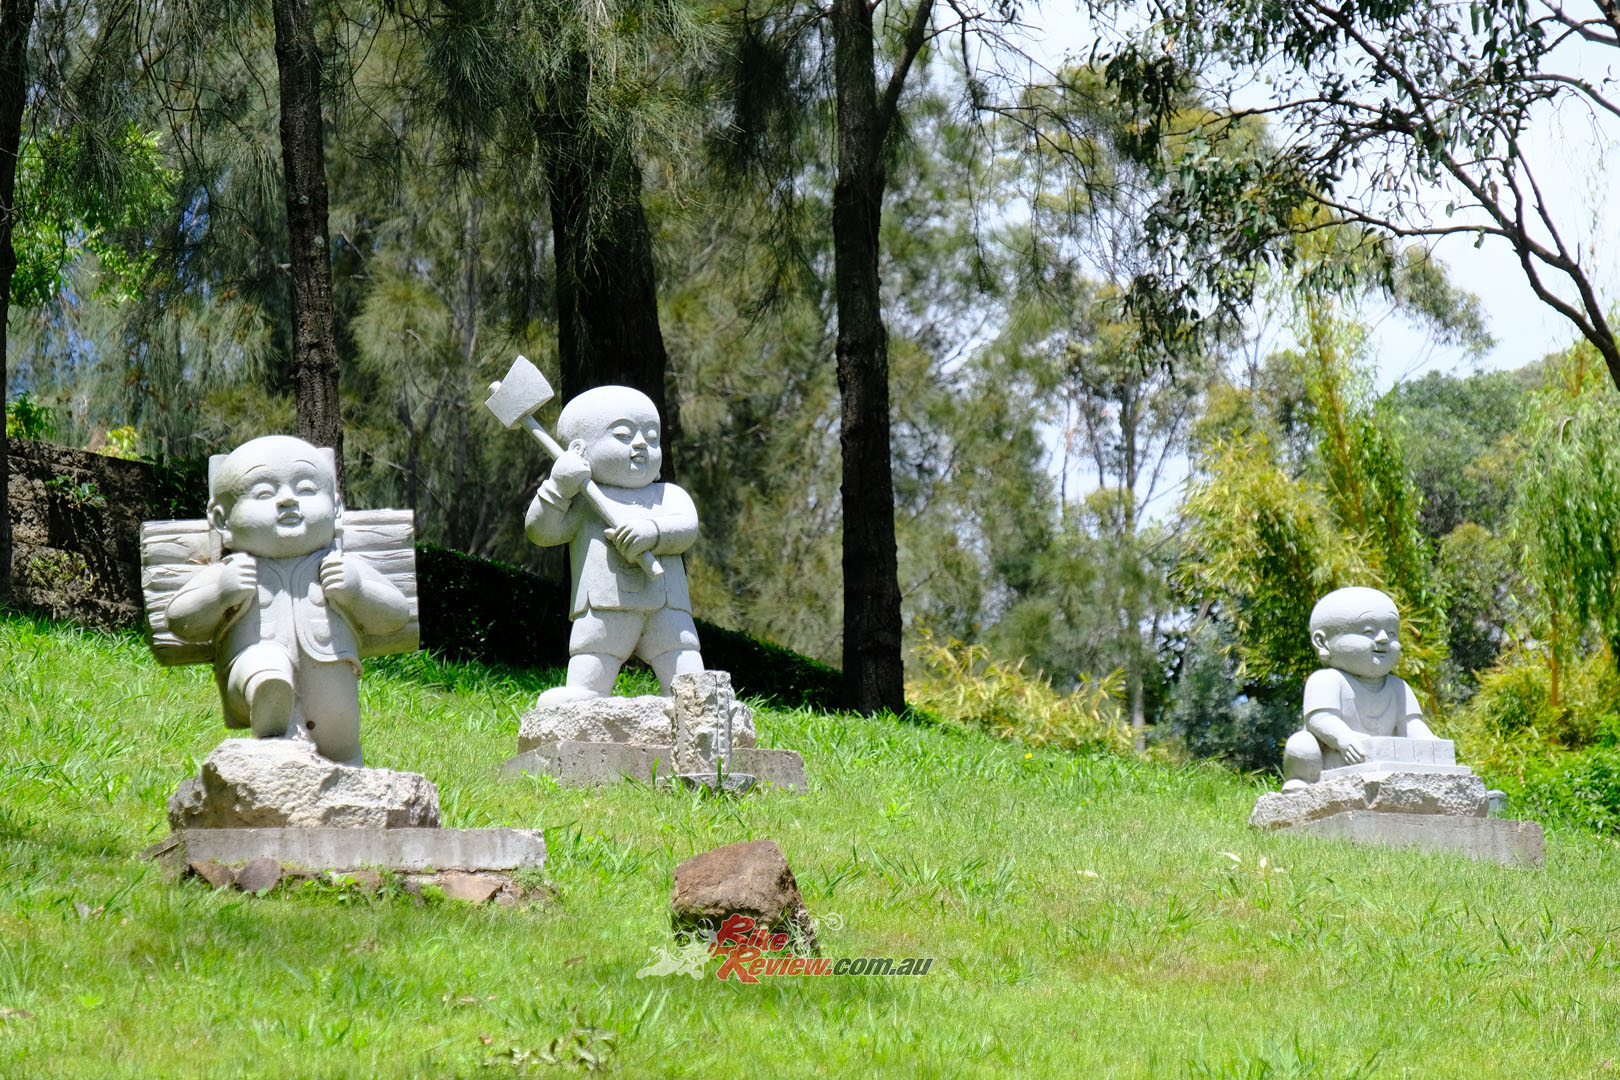 These little people populate one of the lawns at the Nan Tien Temple. There is lots more to see.